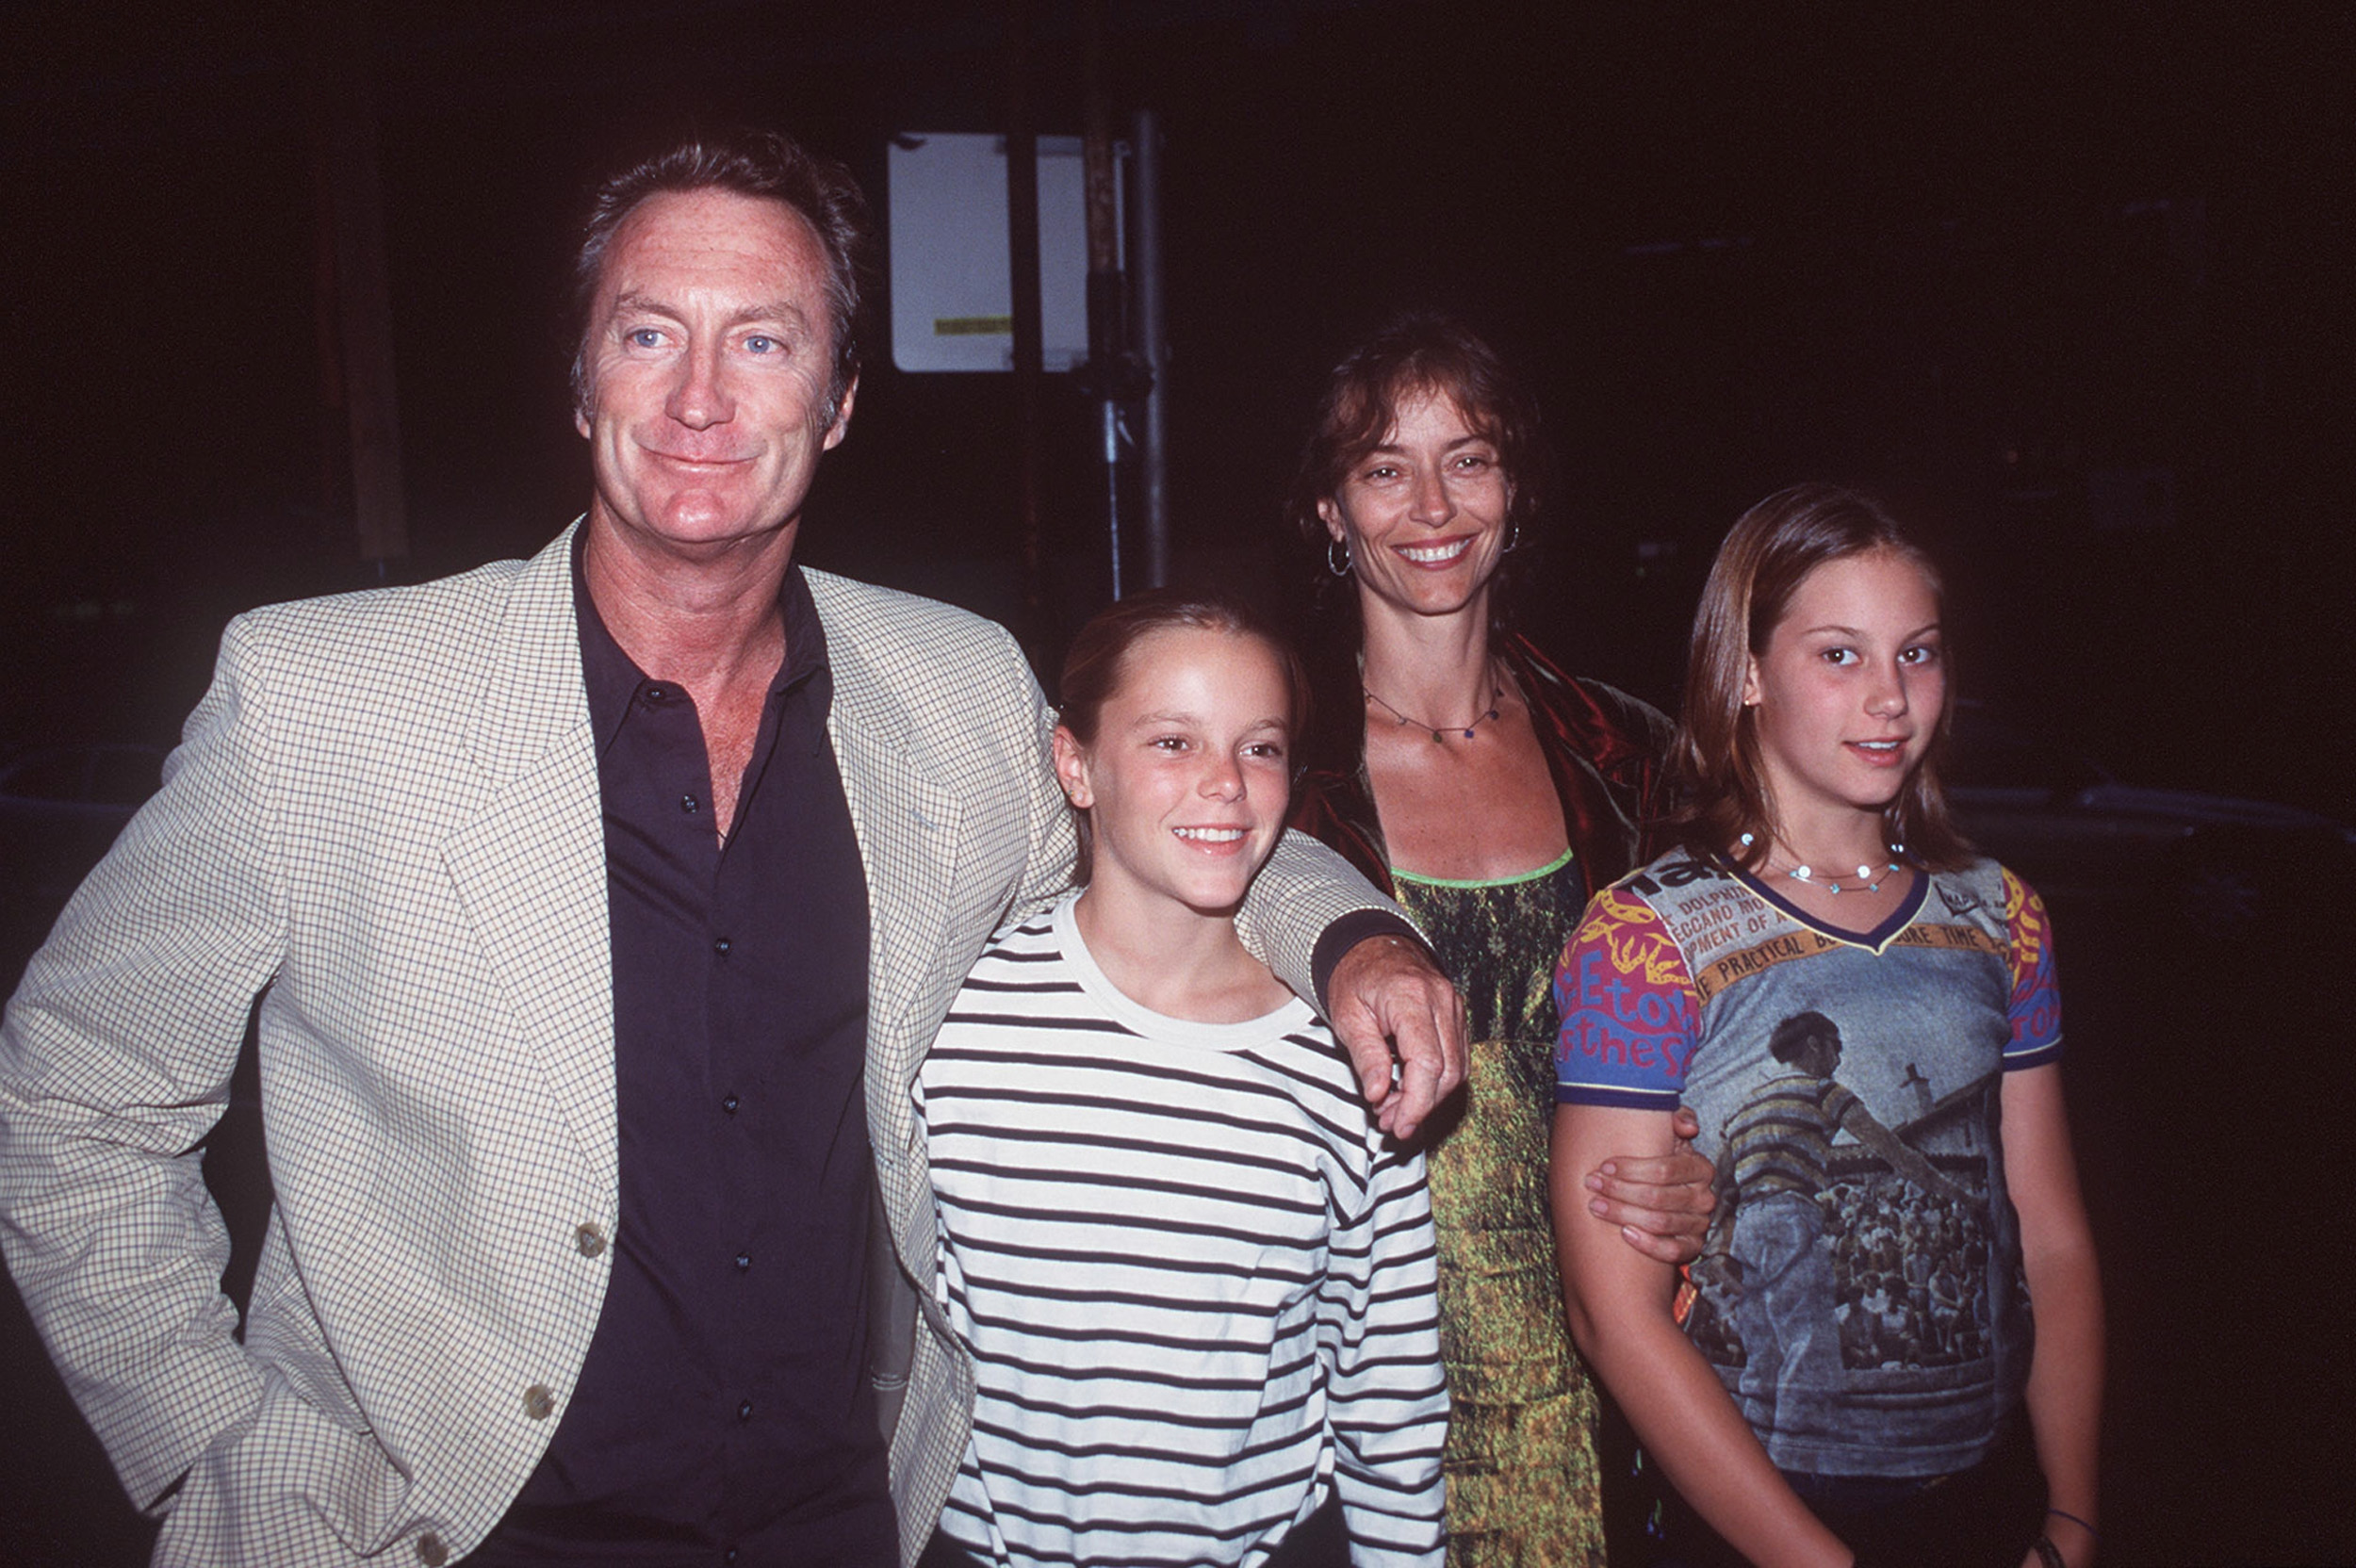 Bryan Brown, Rachel Ward, and their daughters at the "Dear Claudia" premiere in 1999 | Source: Getty Images